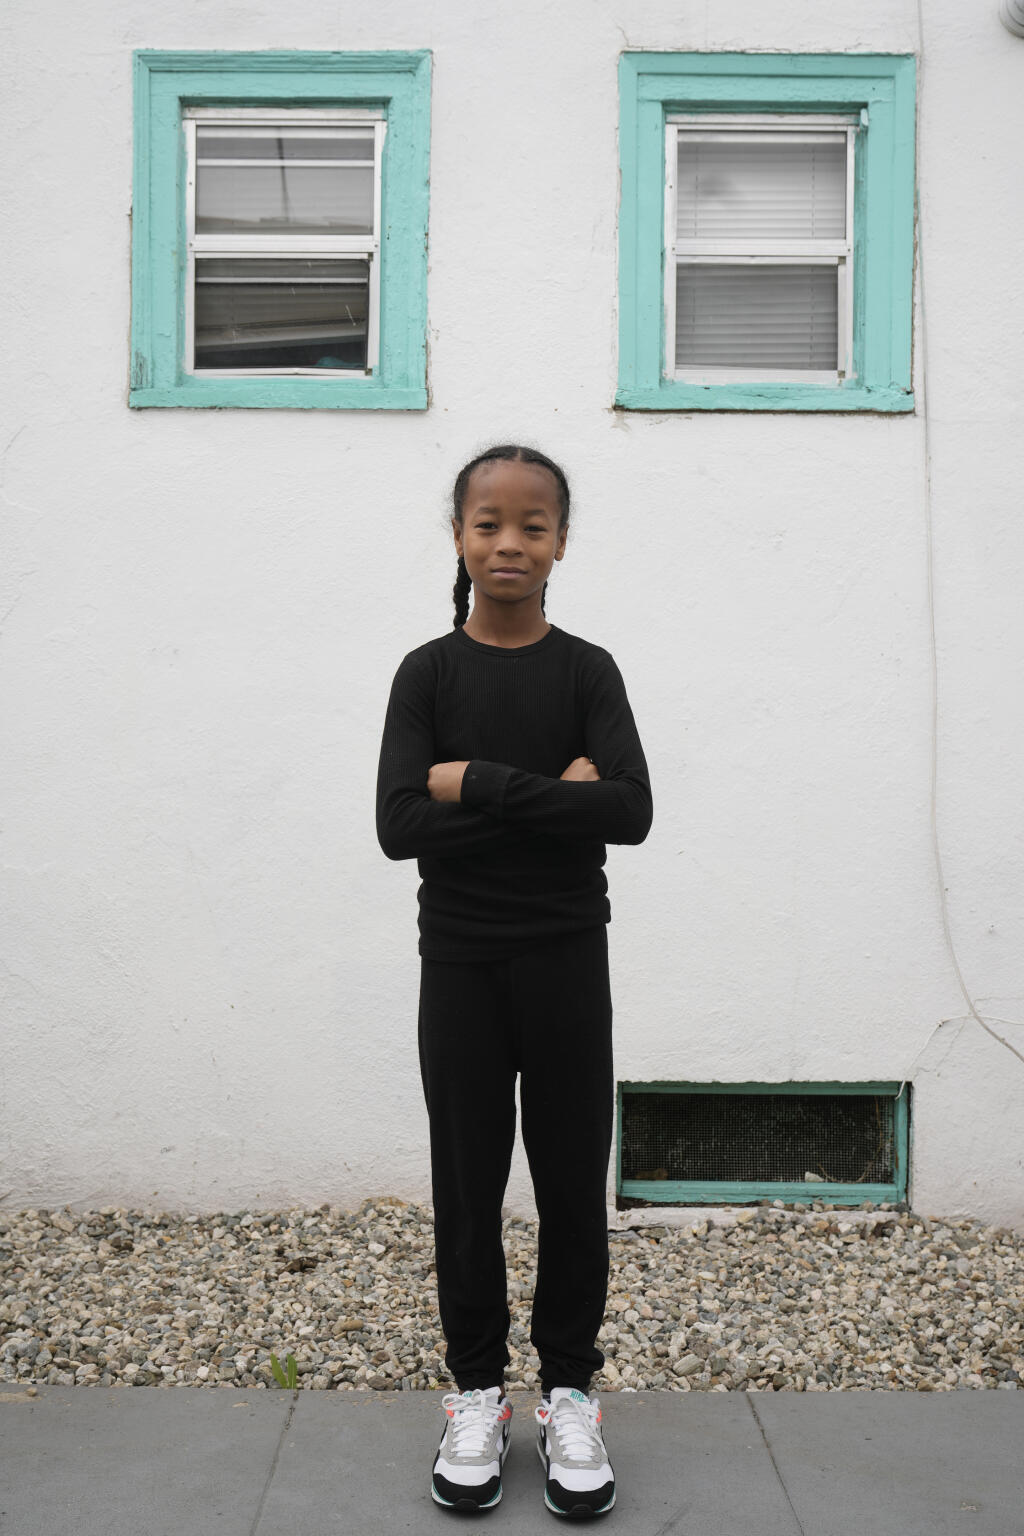 Ezekiel West, 10, stands for a portrait outside his home in Los Angeles on Sunday, Jan. 15, 2023. When he returned to school in fall 2021 as a third grader, he was frustrated that his classmates had made more progress as the years passed. “I did not feel prepared,” he says. “I couldn’t really learn as fast as the other kids, and that kind of made me upset.” (AP Photo/Damian Dovarganes)